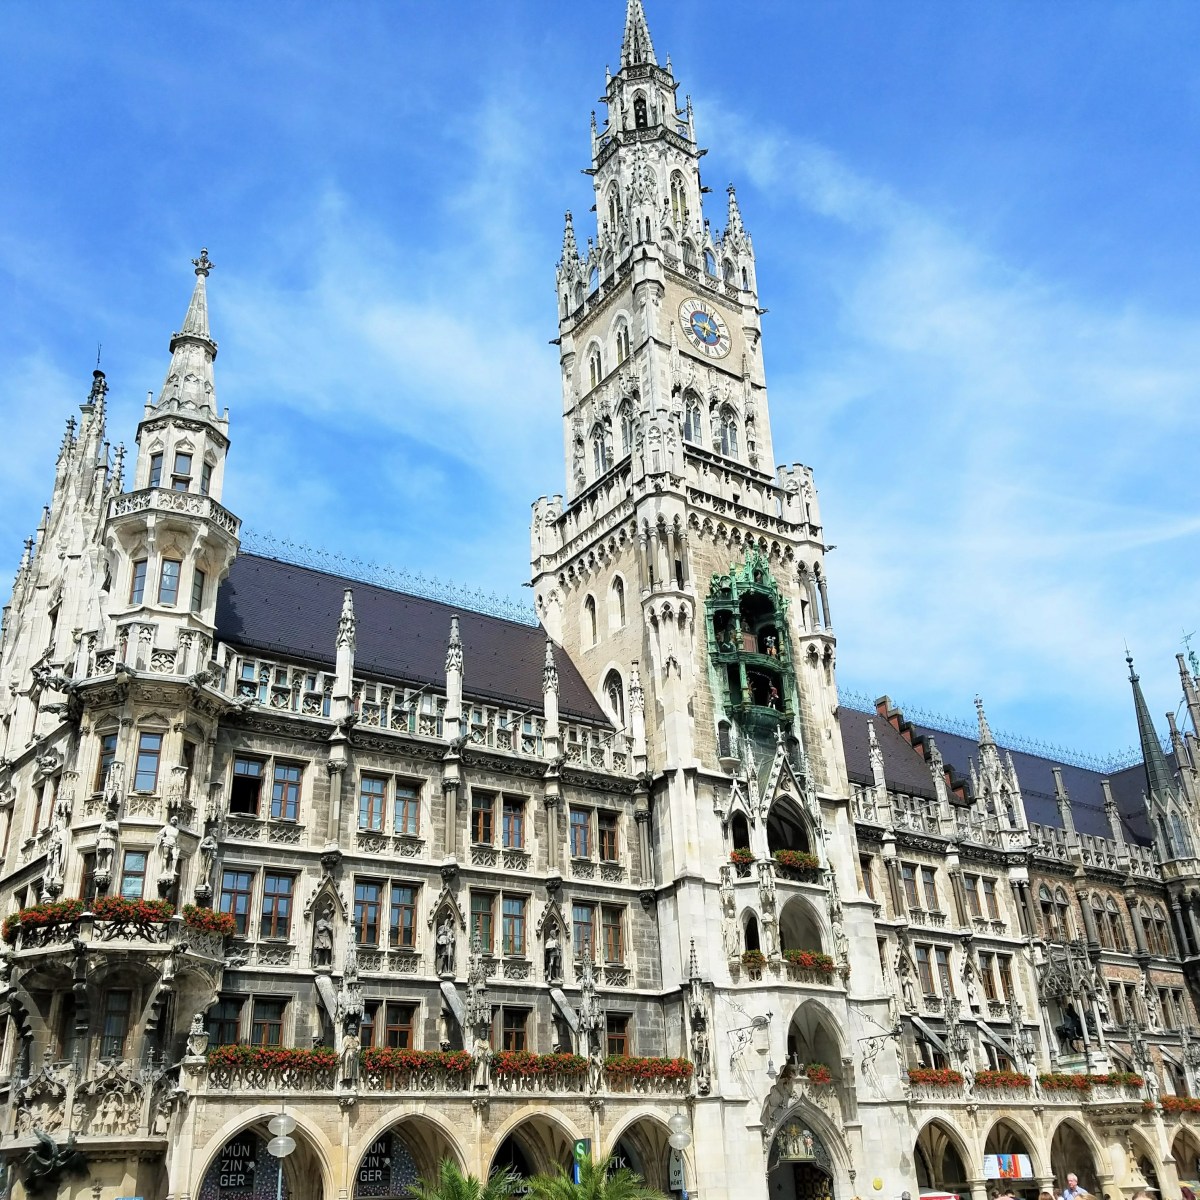 Top 9 Things to do in Munich, Germany